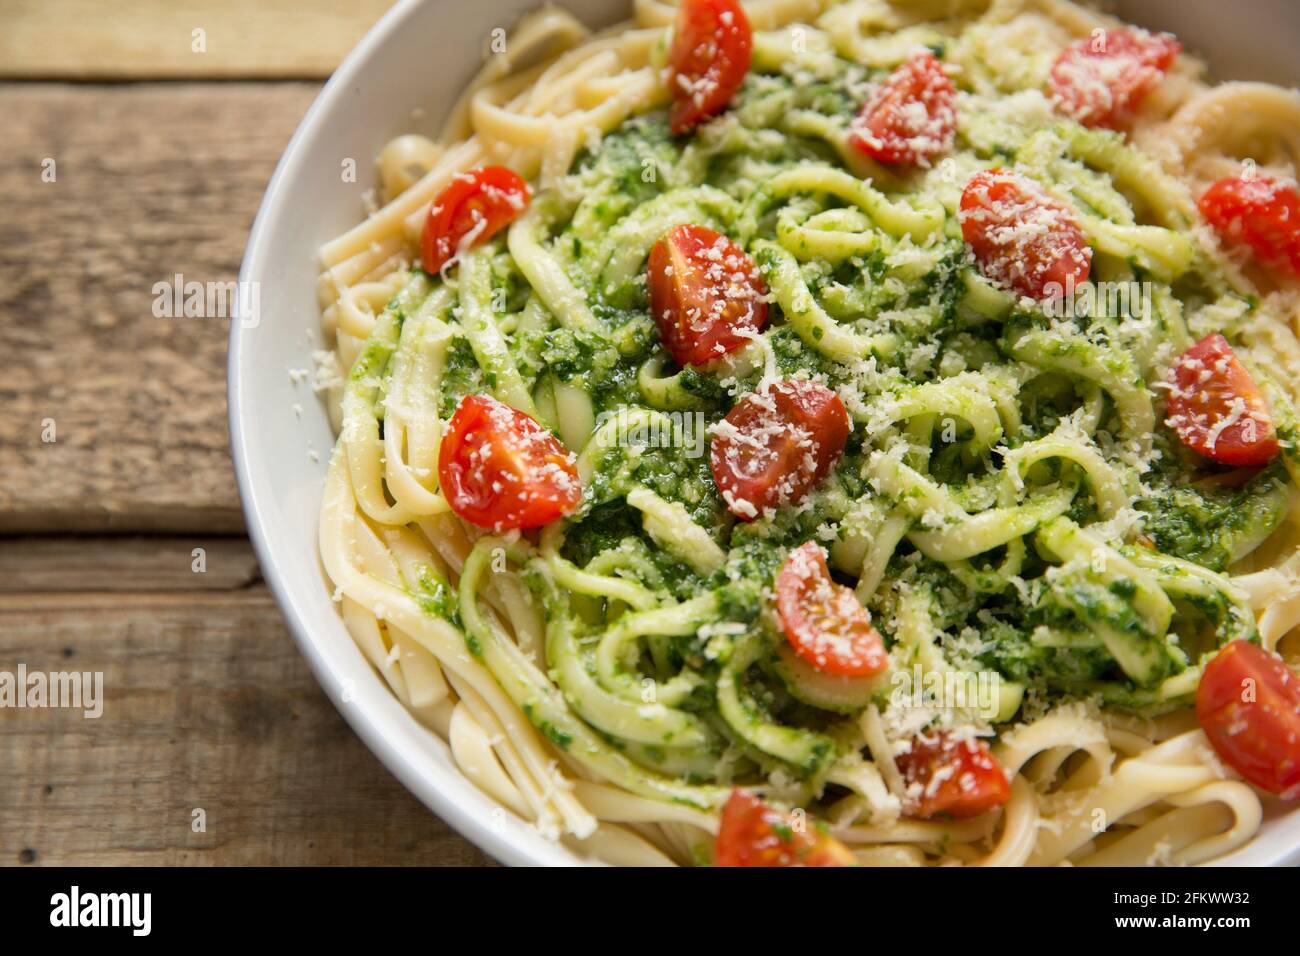 Pesto made from wild garlic, Allium ursinum, that includes rapeseed oil, lemon juice and pine nuts. It has been used to make a linguine pasta dish whi Stock Photo